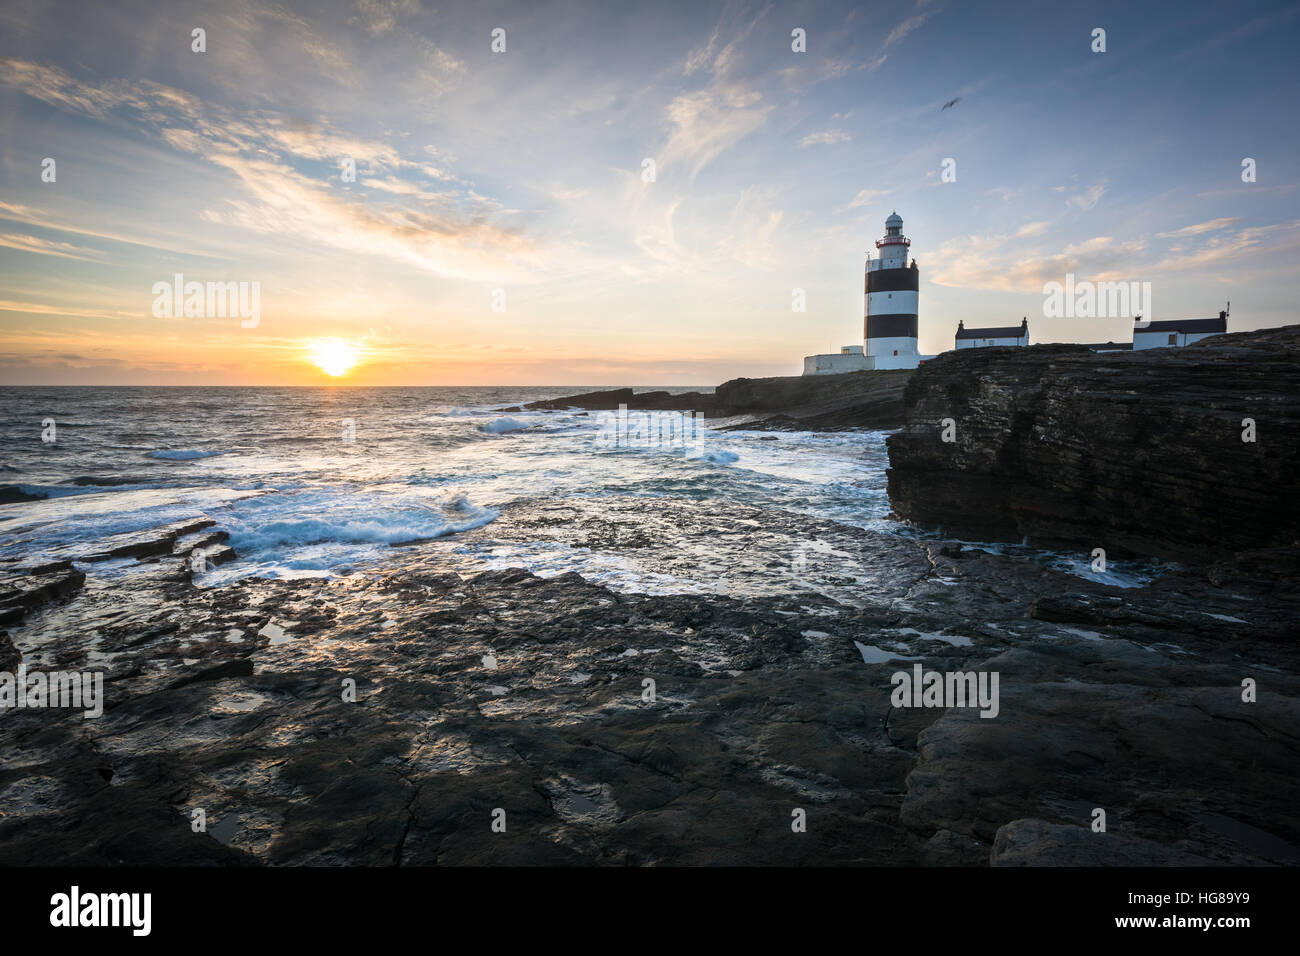 Hook Head Lighthouse in County Wexford, Irland, bei Sonnenuntergang Stockfoto